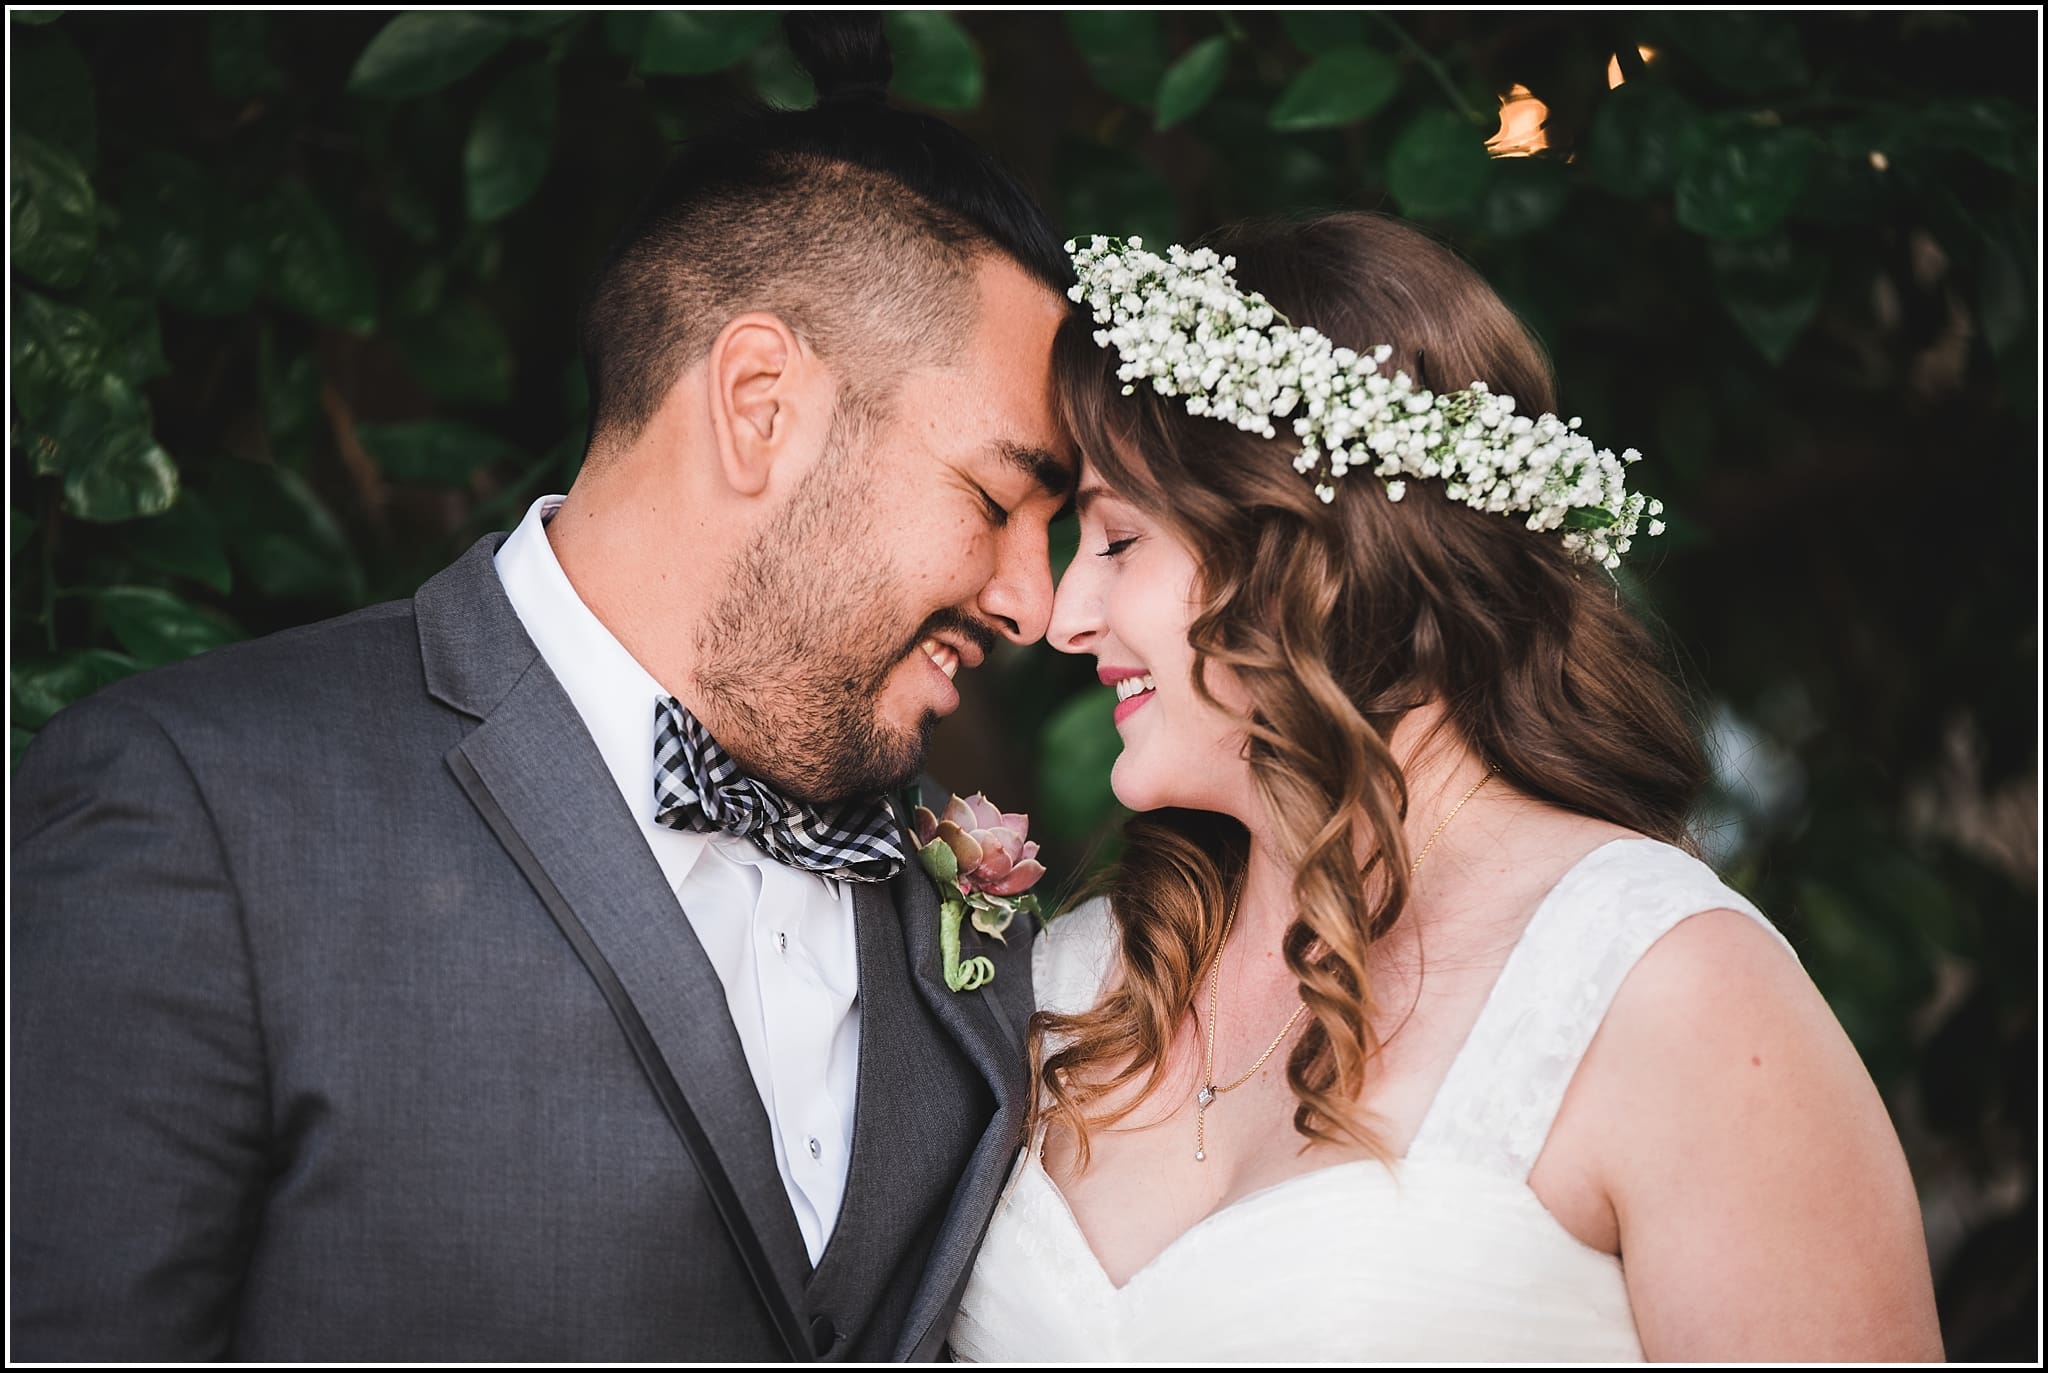  favorite wedding images 2016, wedding photos from 2016, our favorite wedding photos, jackalope ranch wedding, jackalope ranch indio wedding, indio wedding photographer